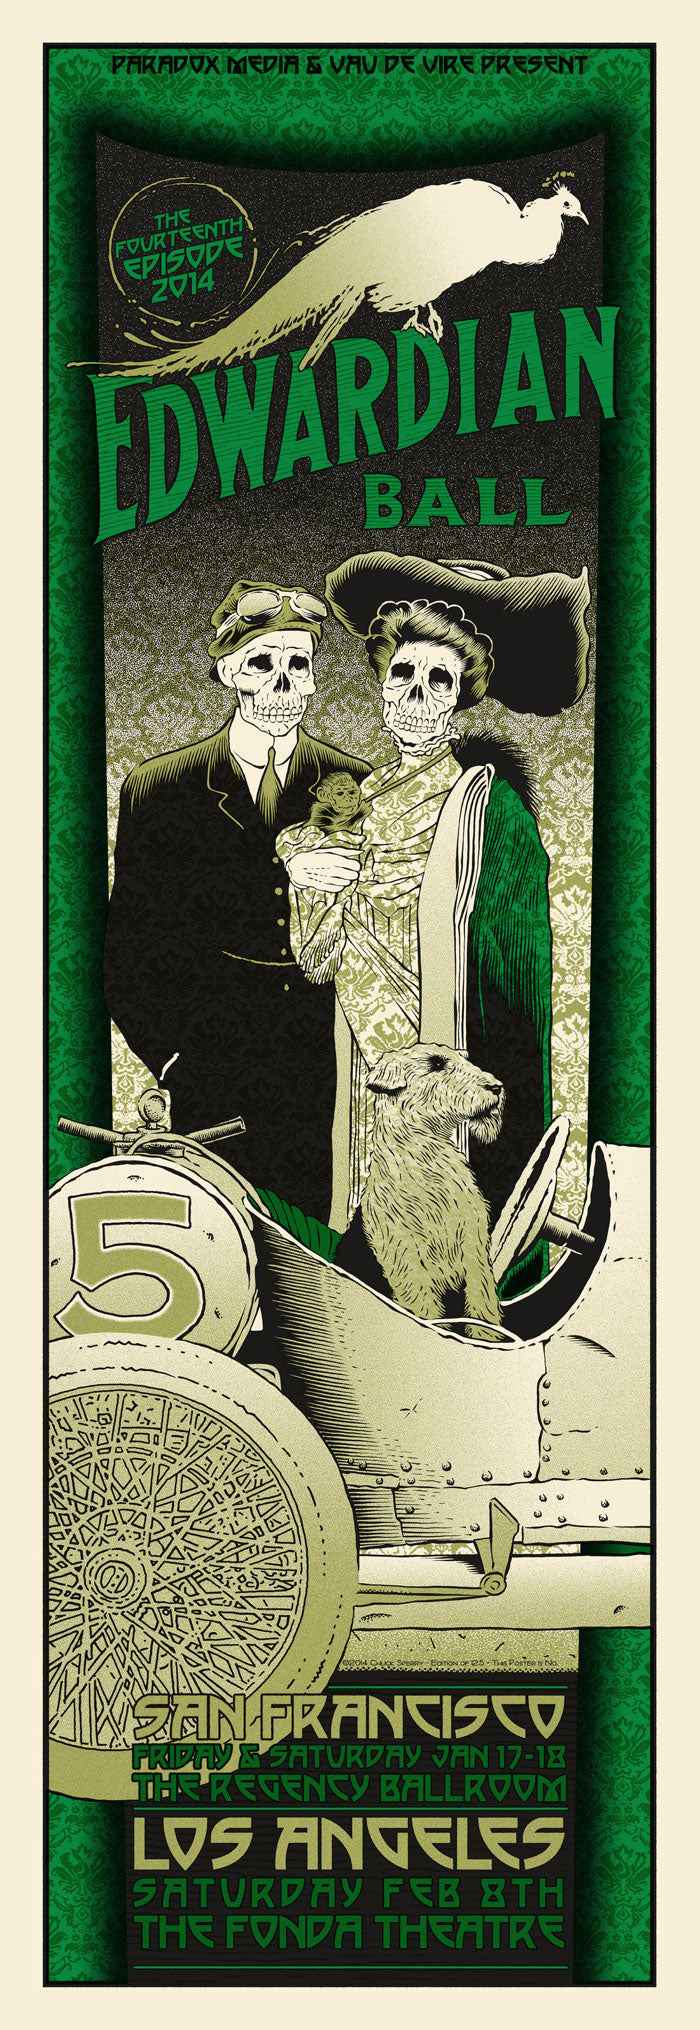 Poster artist:  Chuck Sperry  Edition:  xx/125 s/n  Type:  Screen print  Size:  20" x 58"  Location:  San Francisco, CA  Venue:  Regency Ballroom  Notes:  Check out our other listings for more hard-to-find and out-of-print posters.  Signed and numbered by the artist.